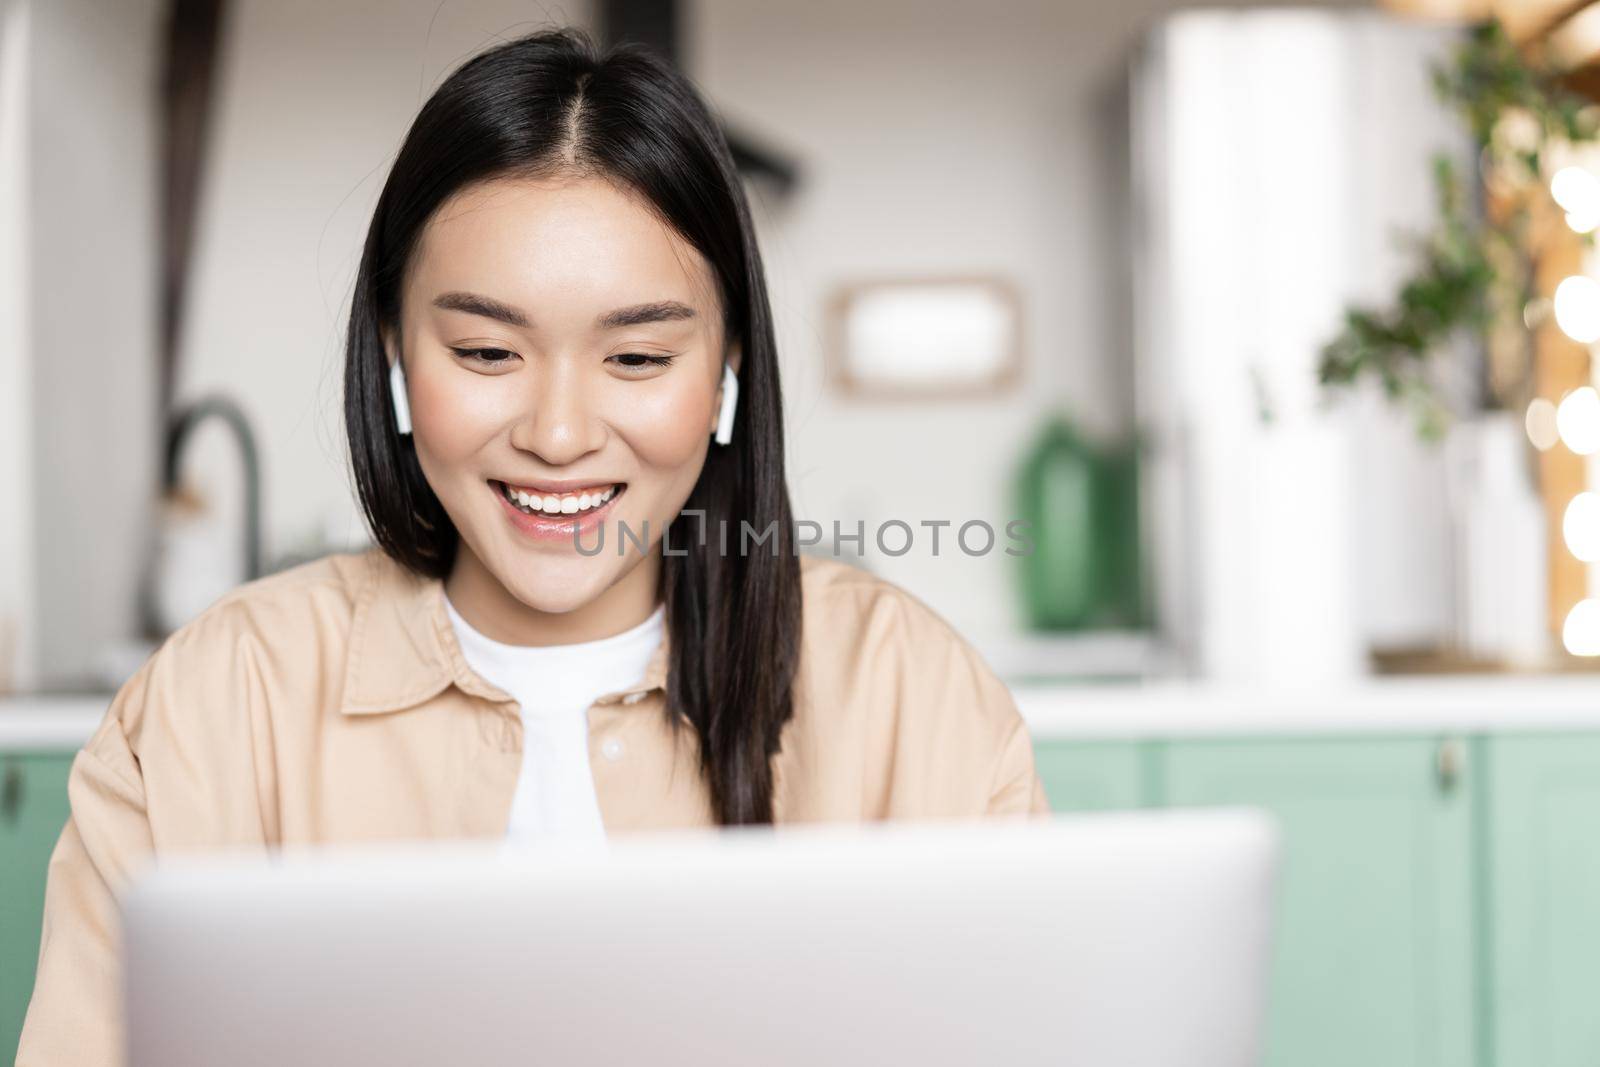 Smiling asian girl listening, watching on laptop, looking at computer during online webinar. Concept of remote education or work.